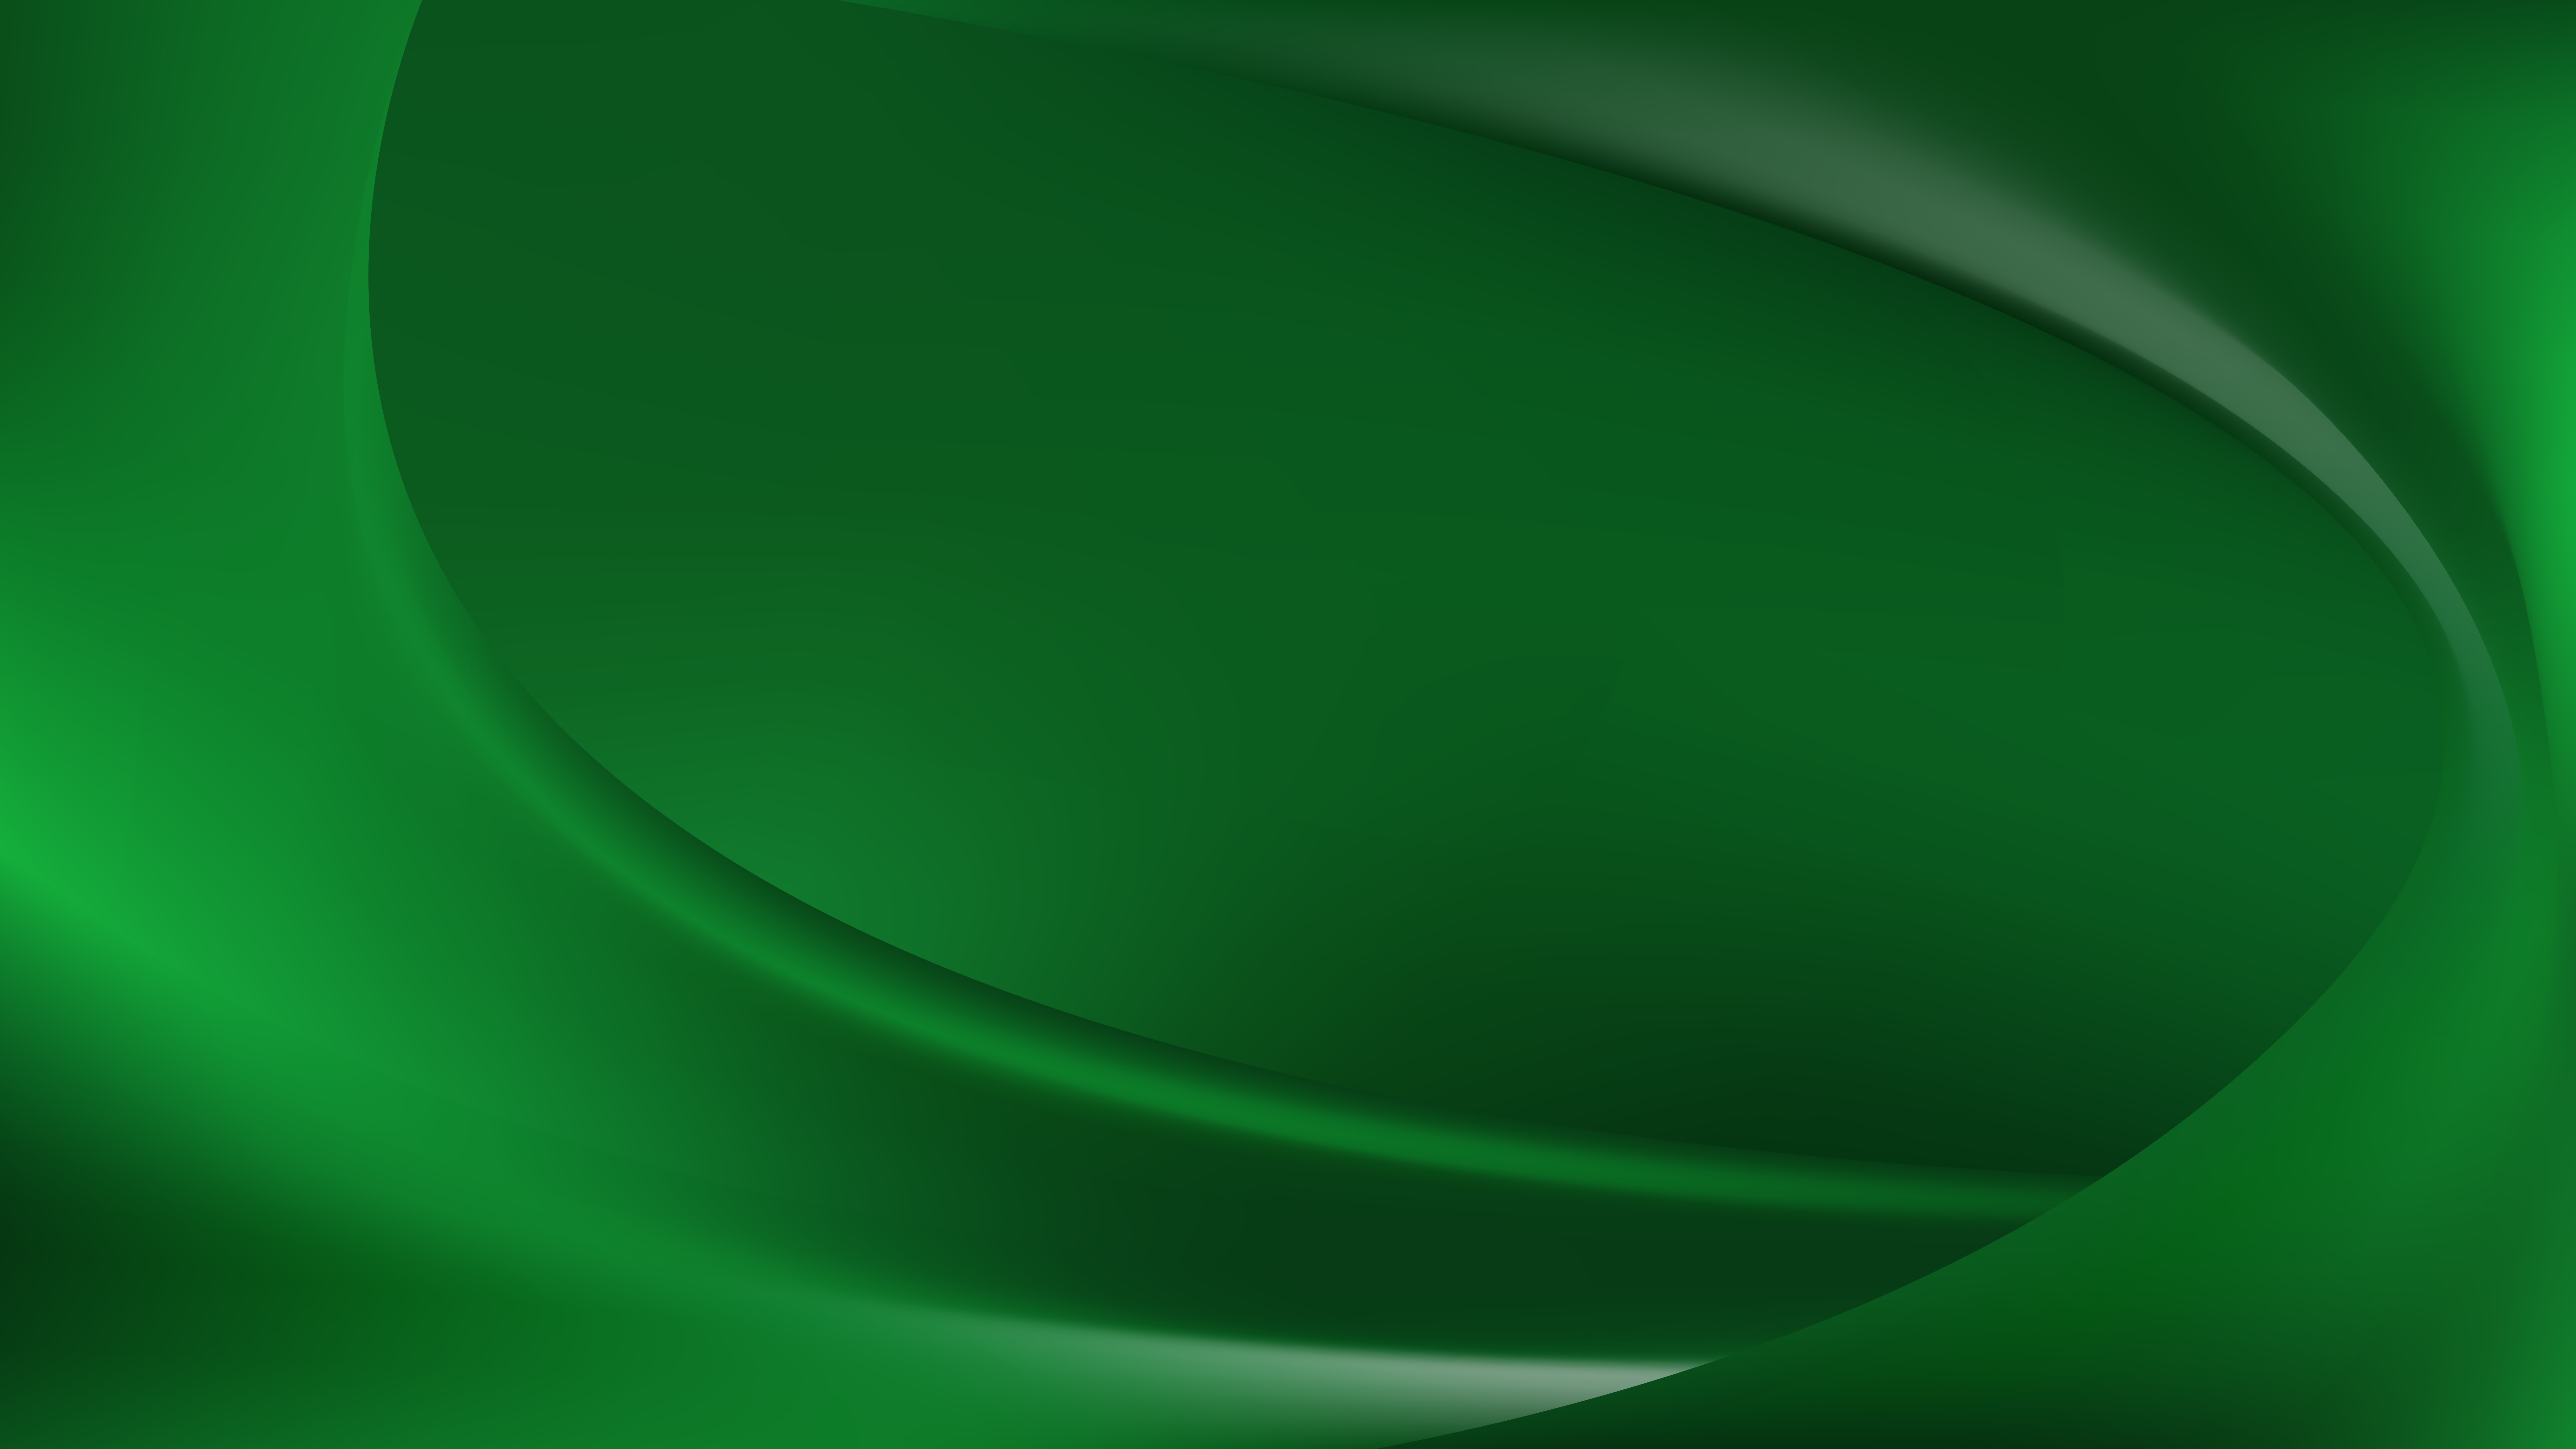 Free Dark Green Wave Background Template Vector Graphic